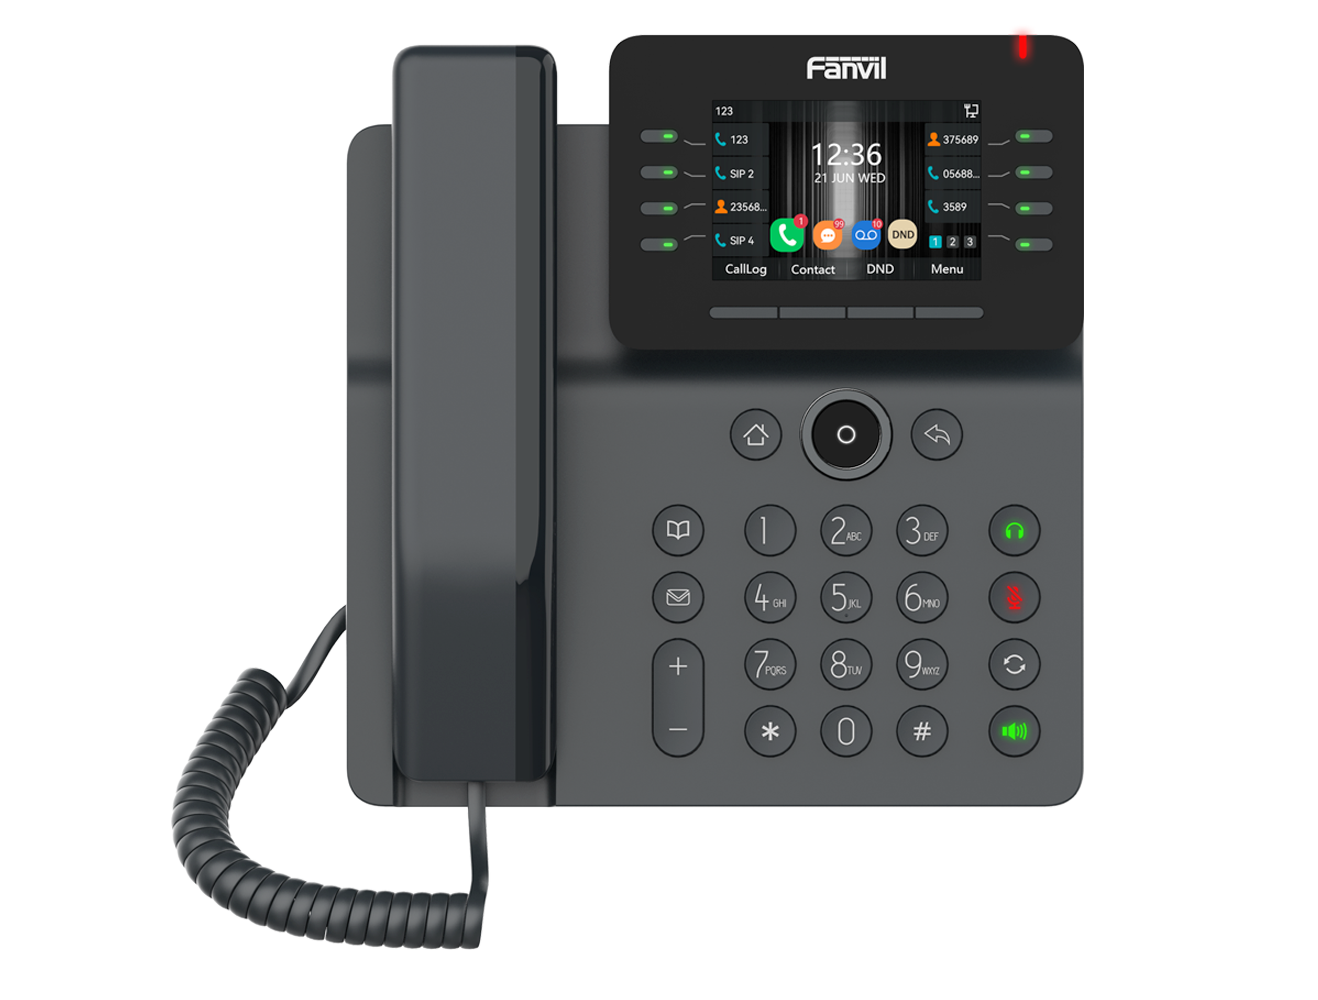 Can you provide the UPC for the product fanvil v64 Enterprise Phone?